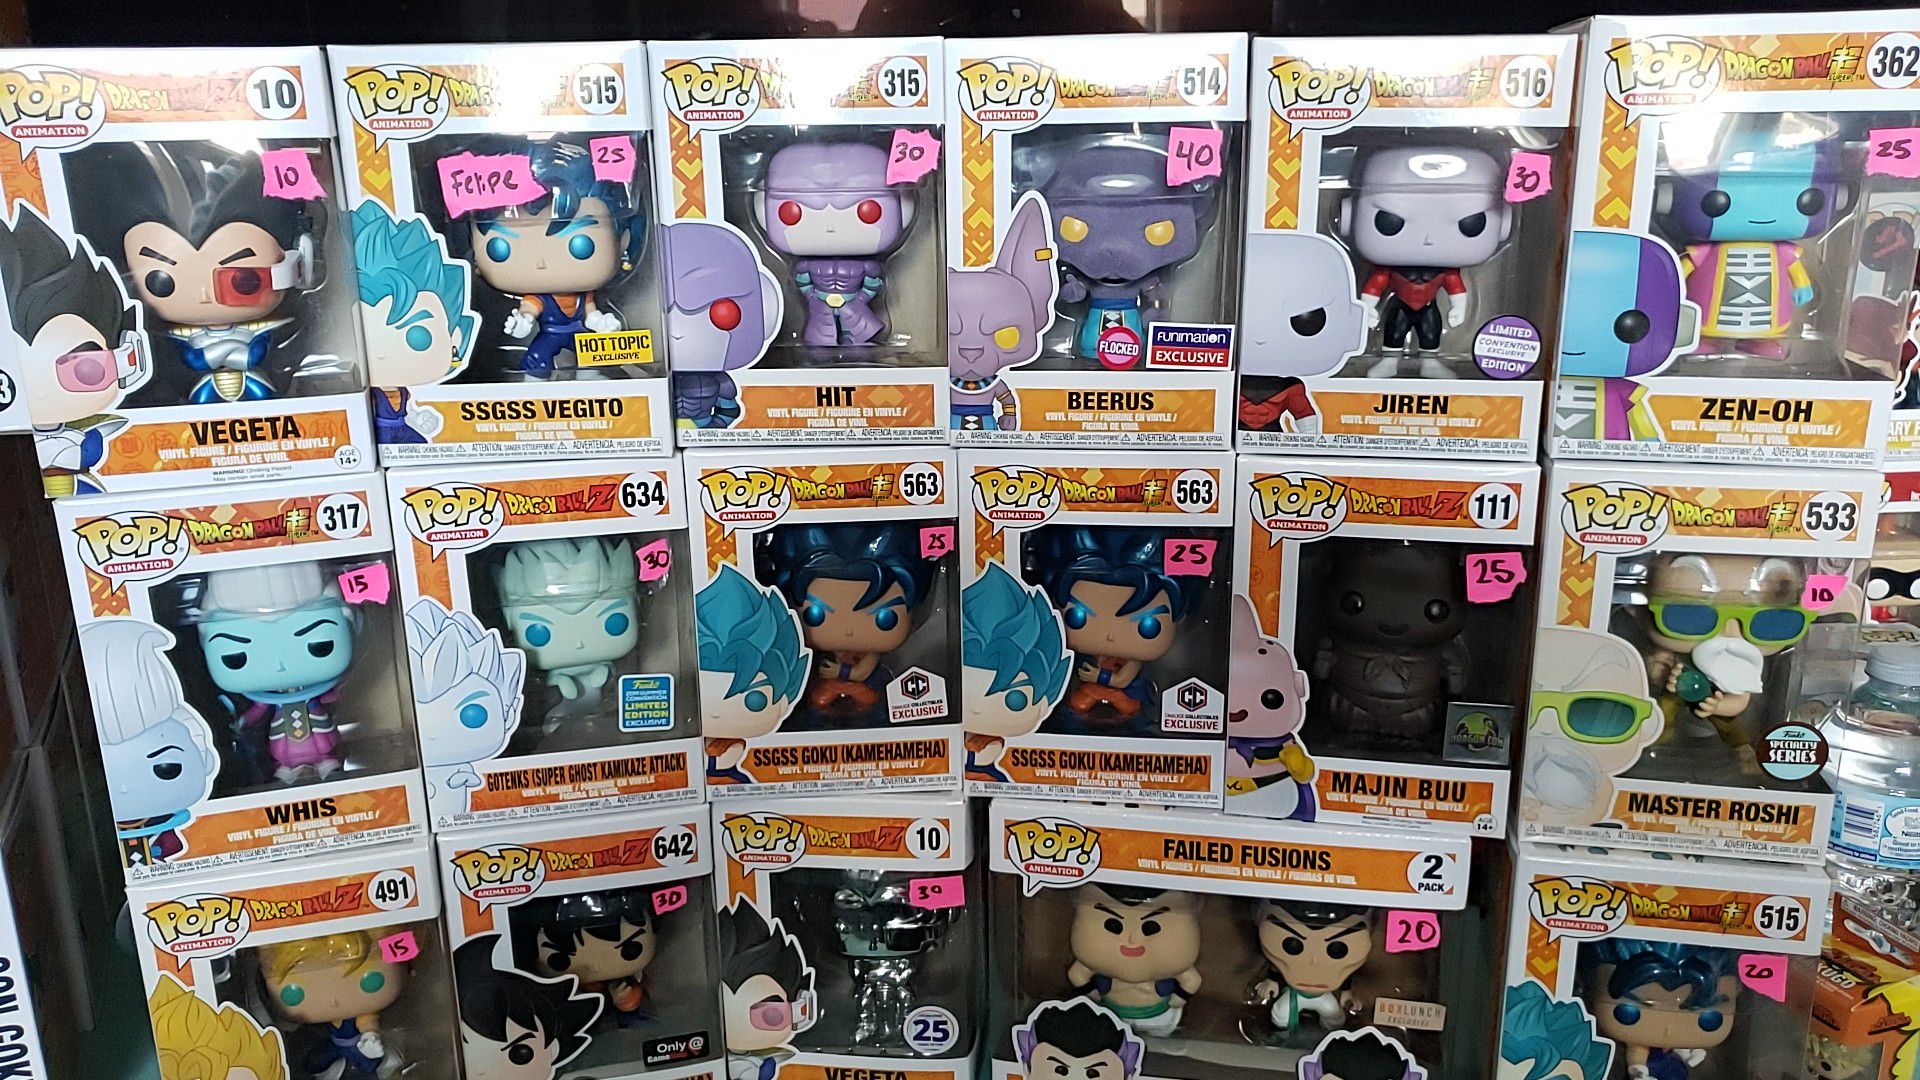 Dragonball Z funko pop collection ! Make me offers